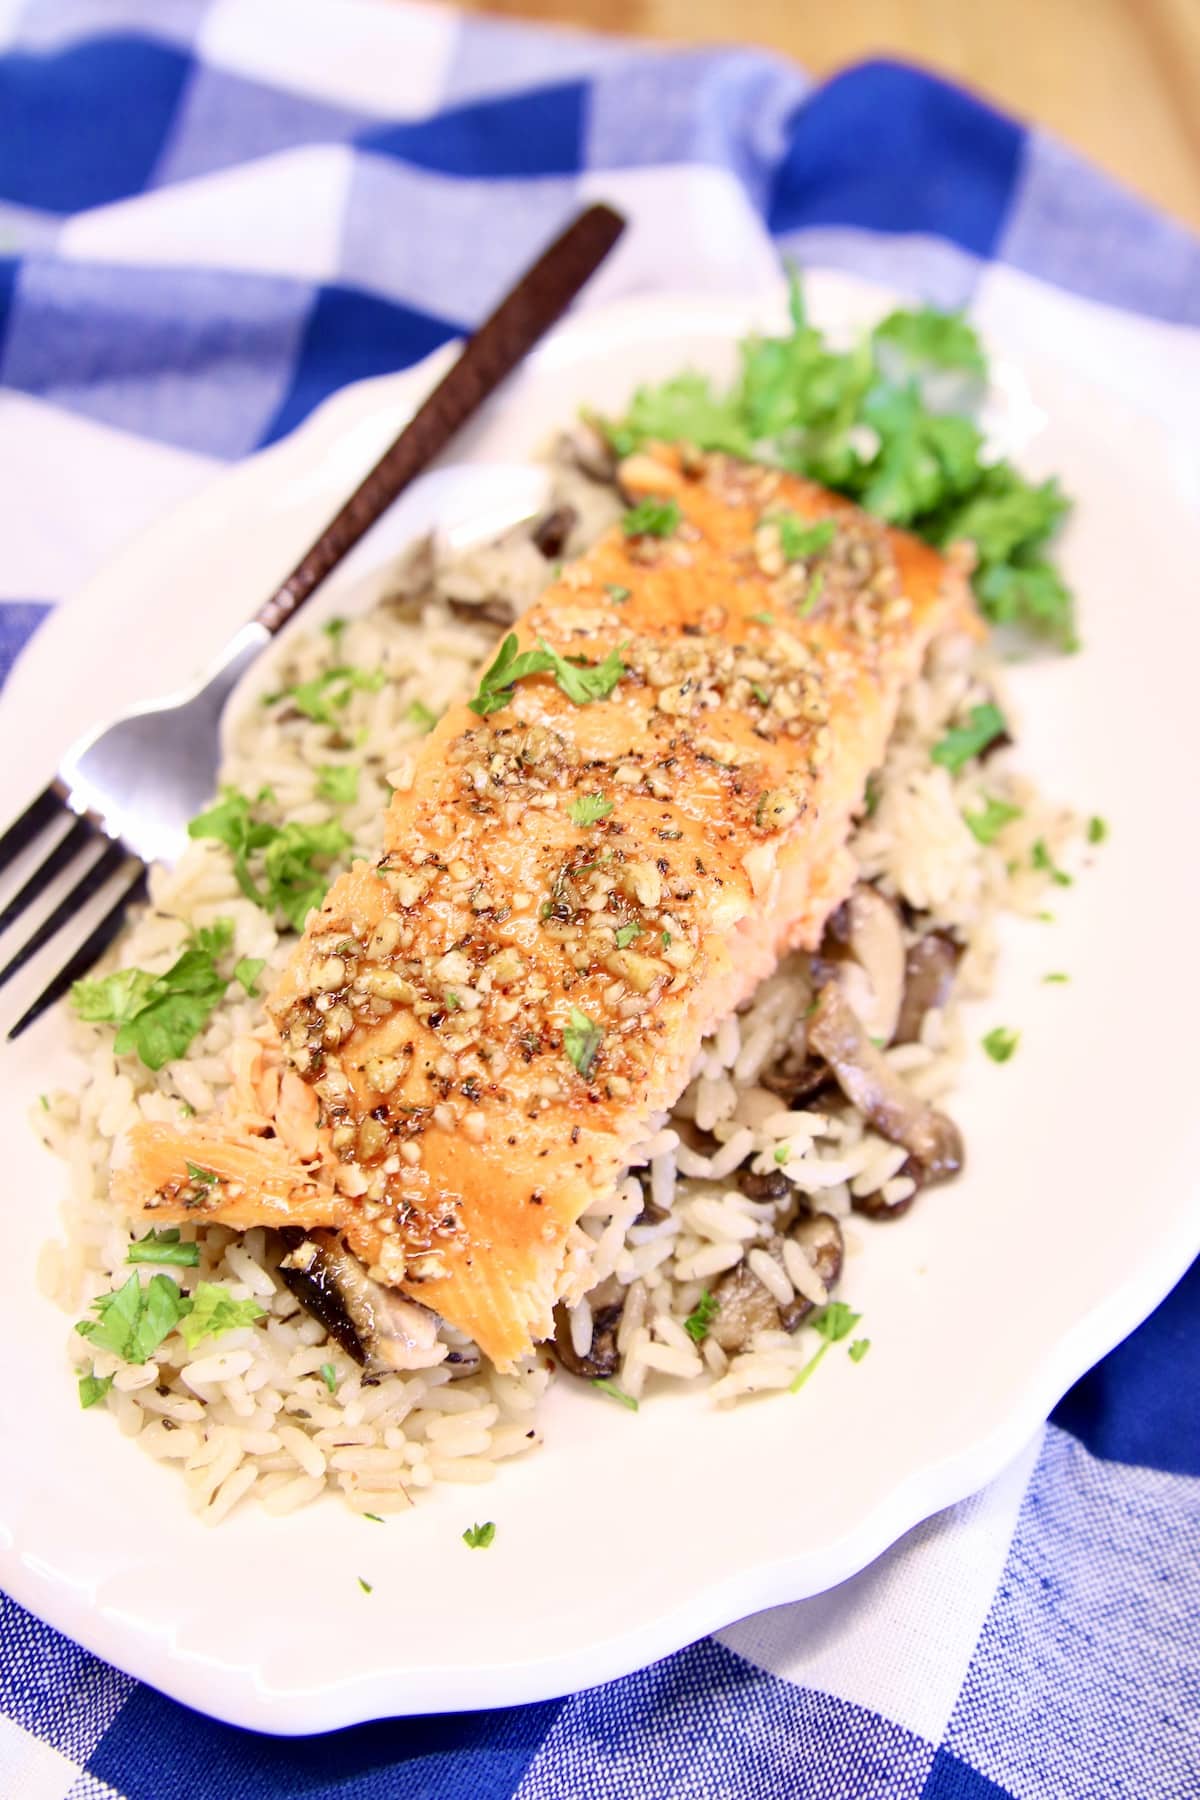 Filet of salmon over rice.